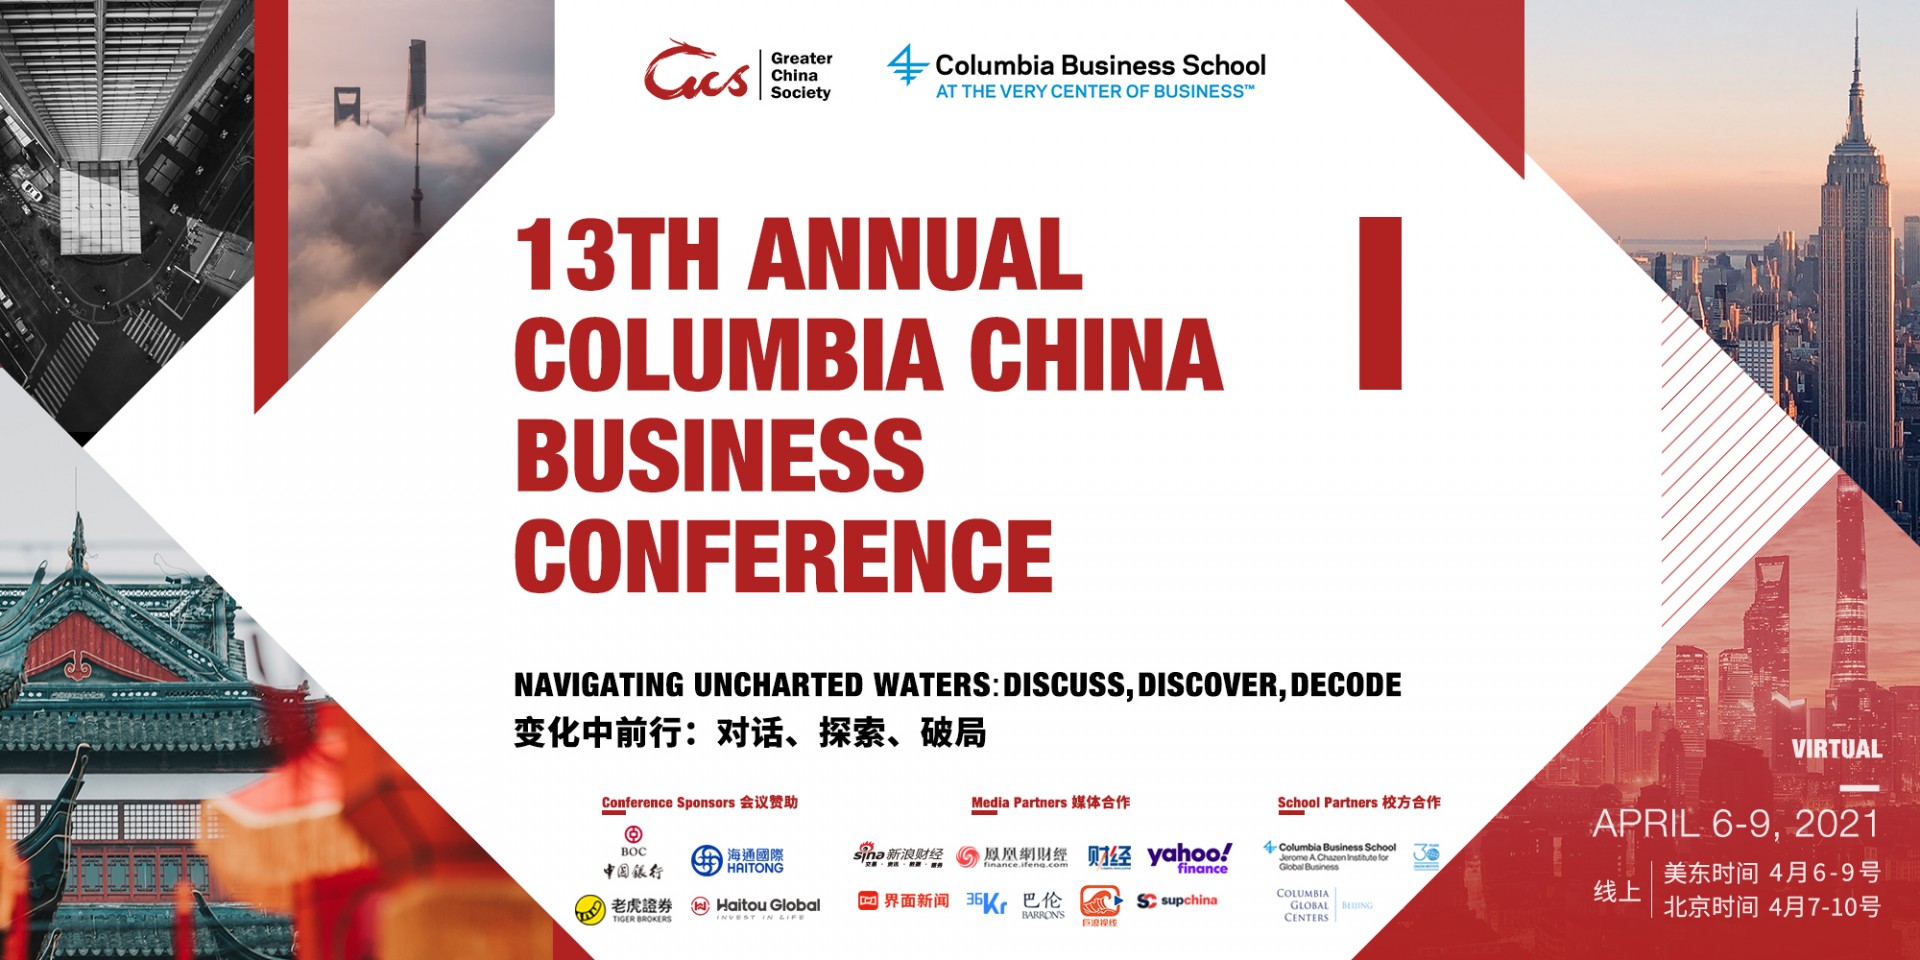 CGC-Beijing 13th Annual Columbia China Business Conference poster